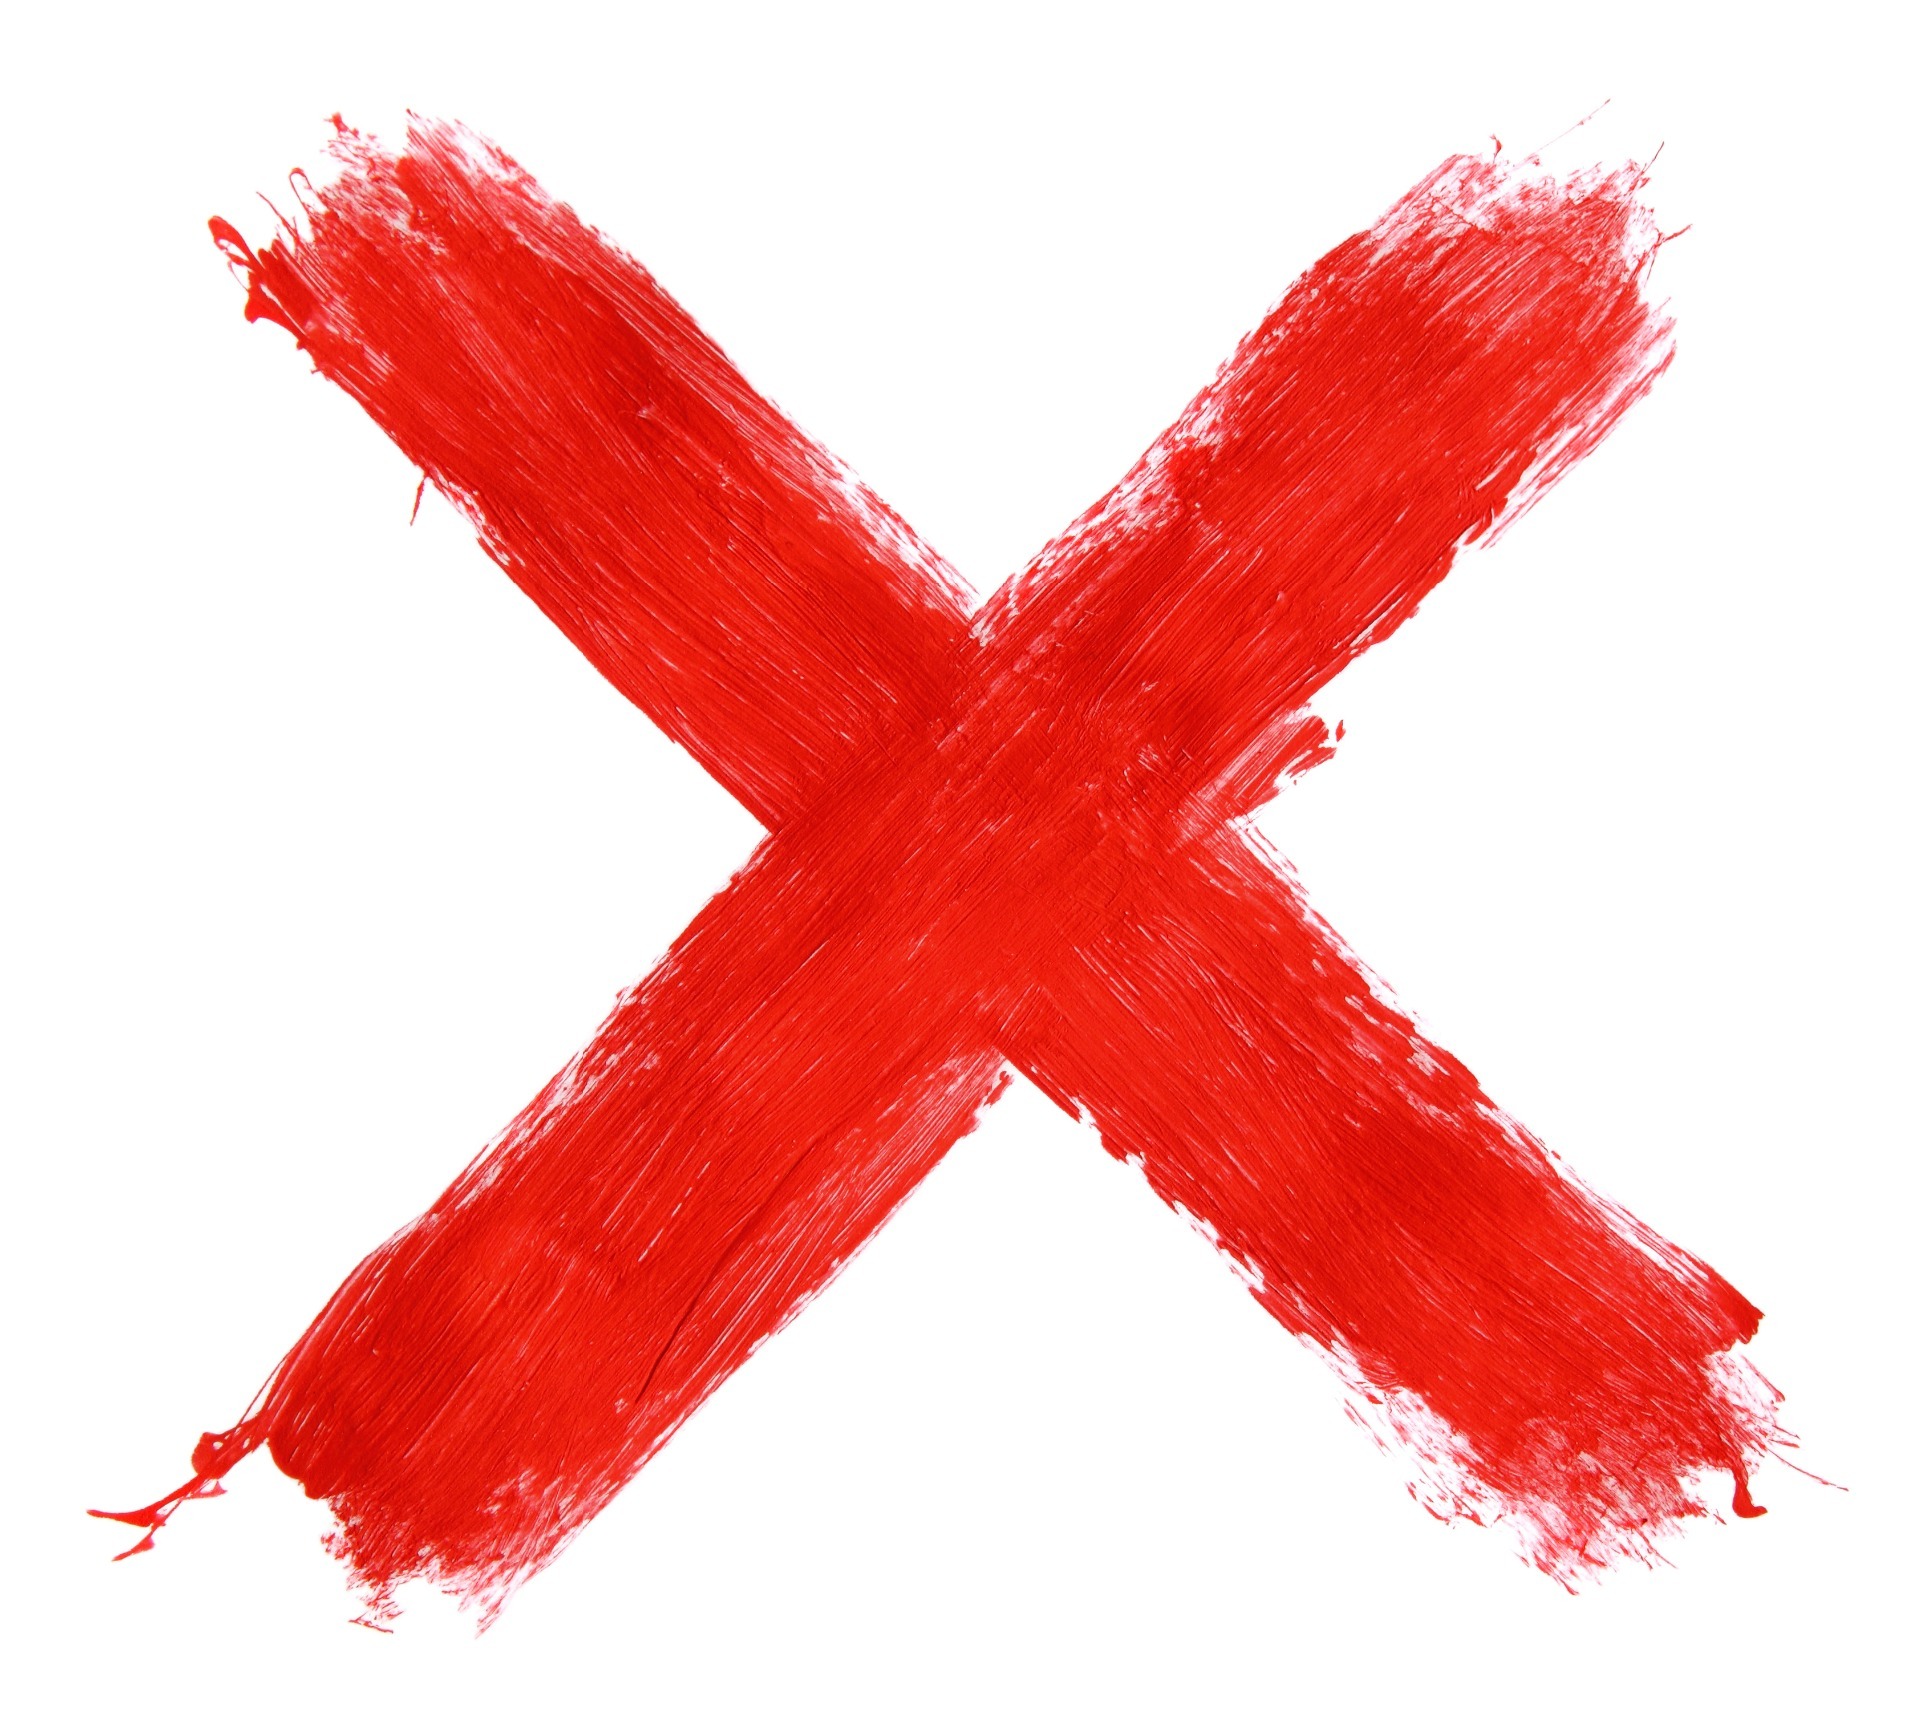 A big red 'X' (or kiss) painted onto a white background